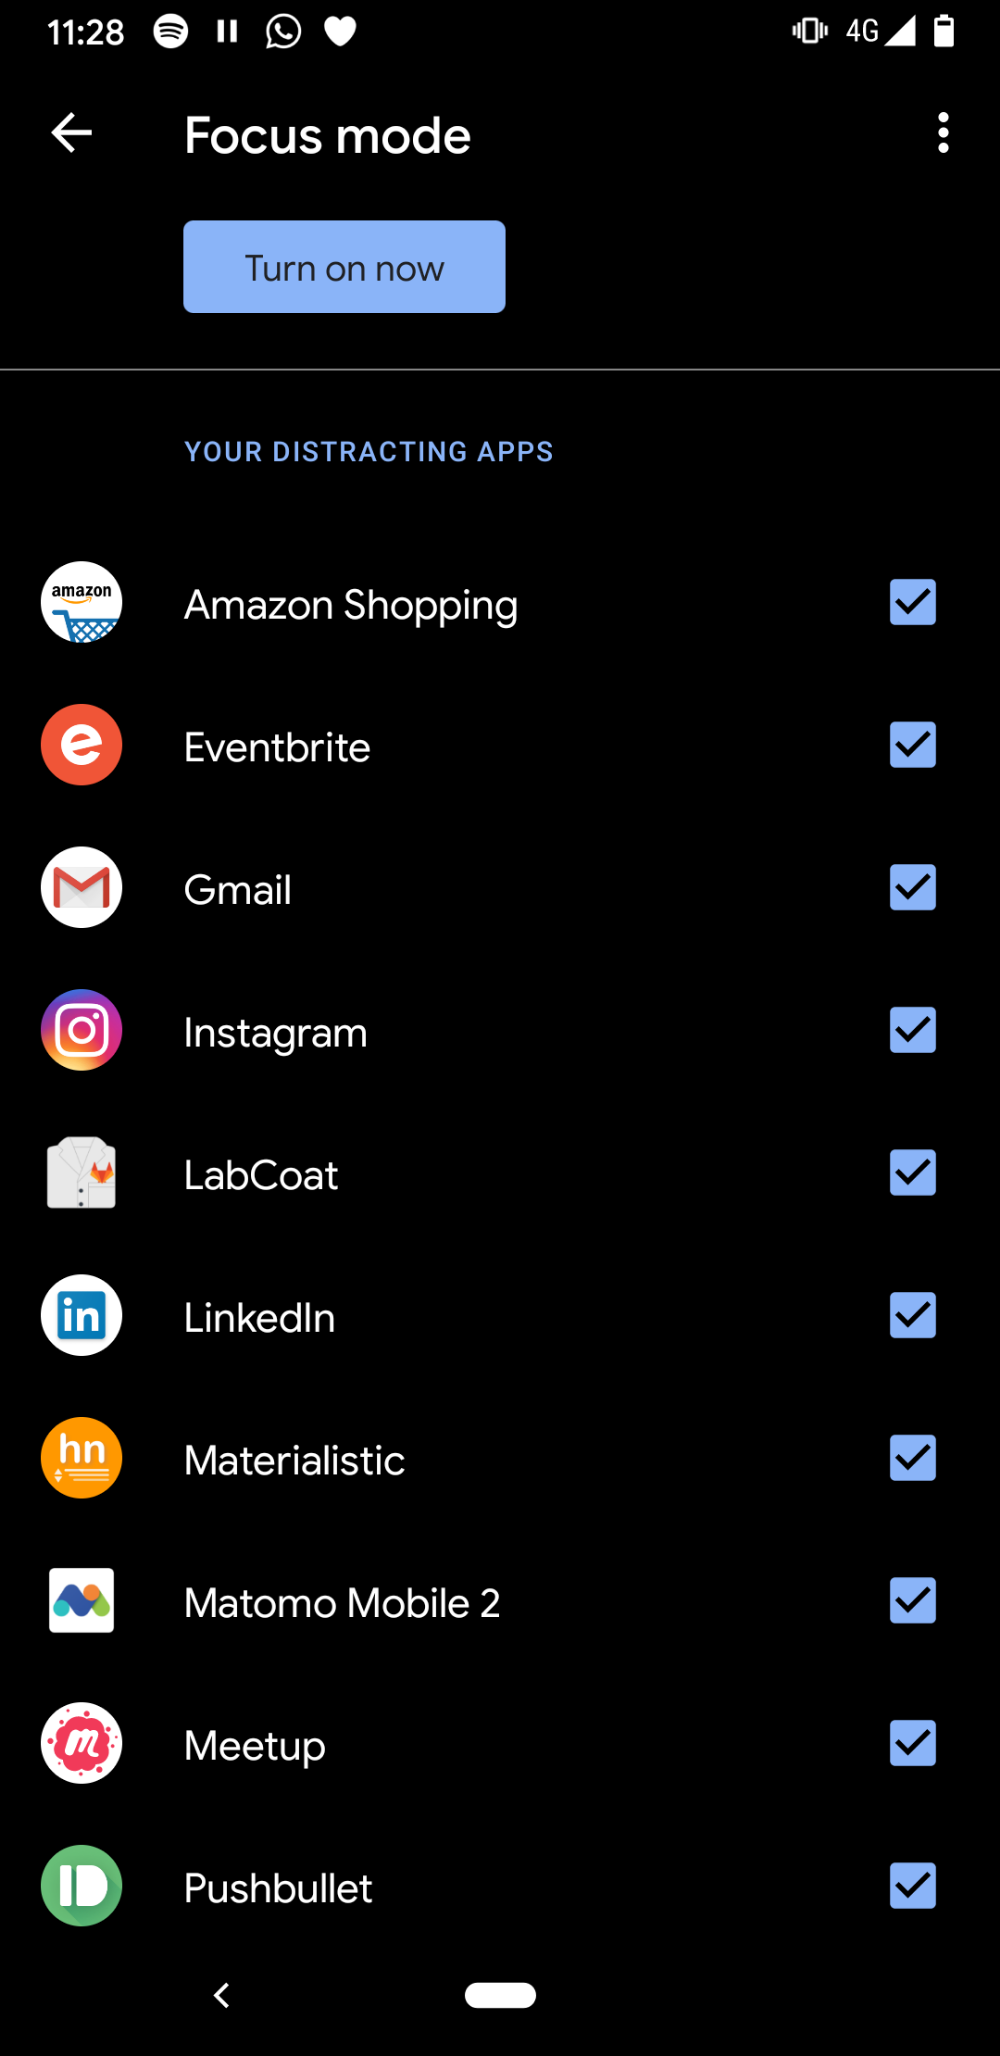 The Android Focus Mode settings listing several apps to block during Focus Mode